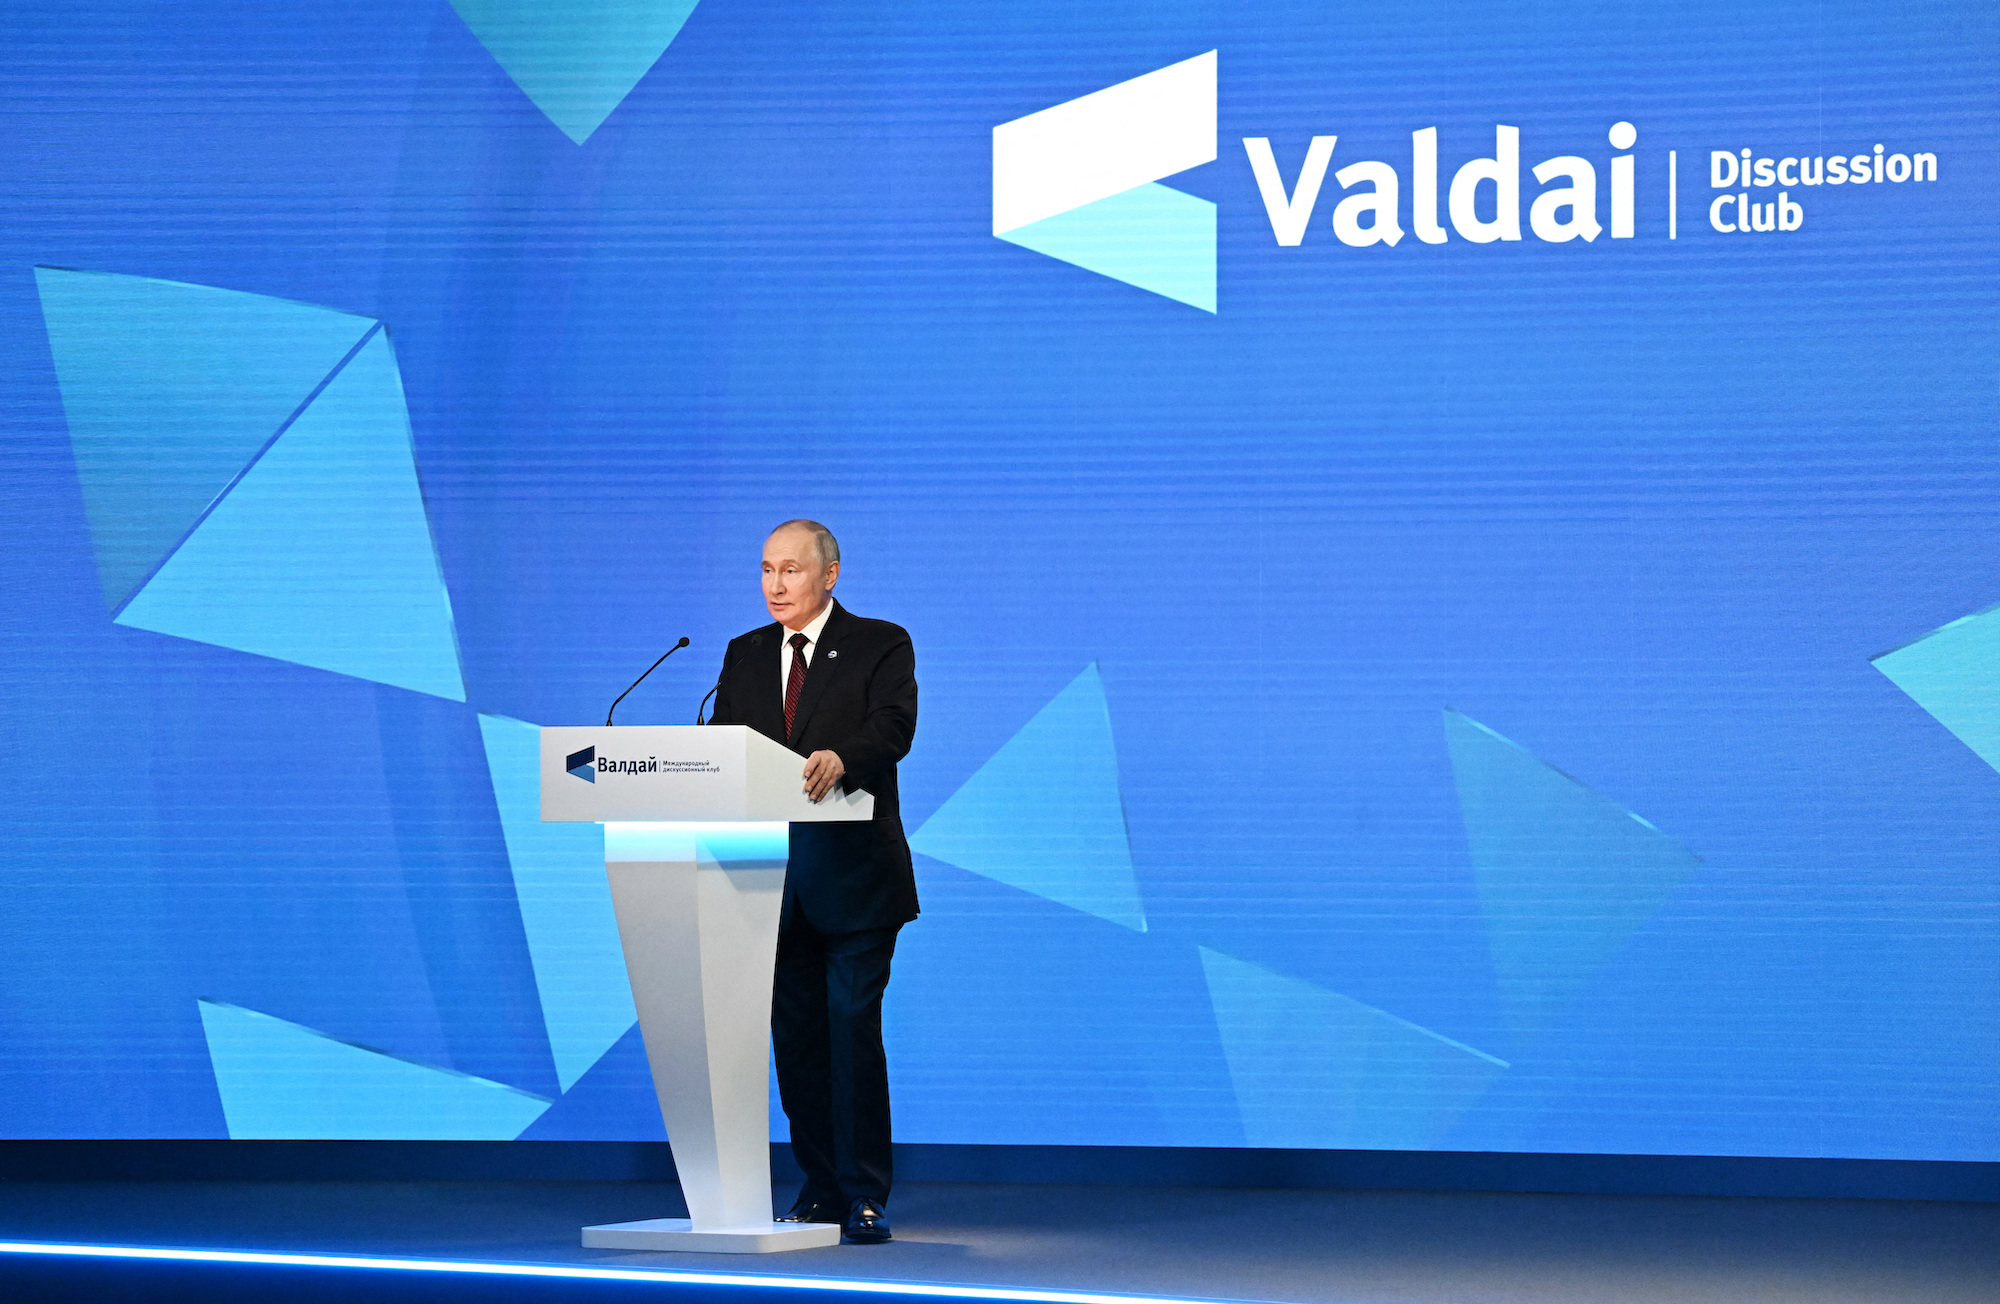 Vladimir Putin delivers a speech at the Valdai Discussion Club in Sochi, Russia, on Thursday.